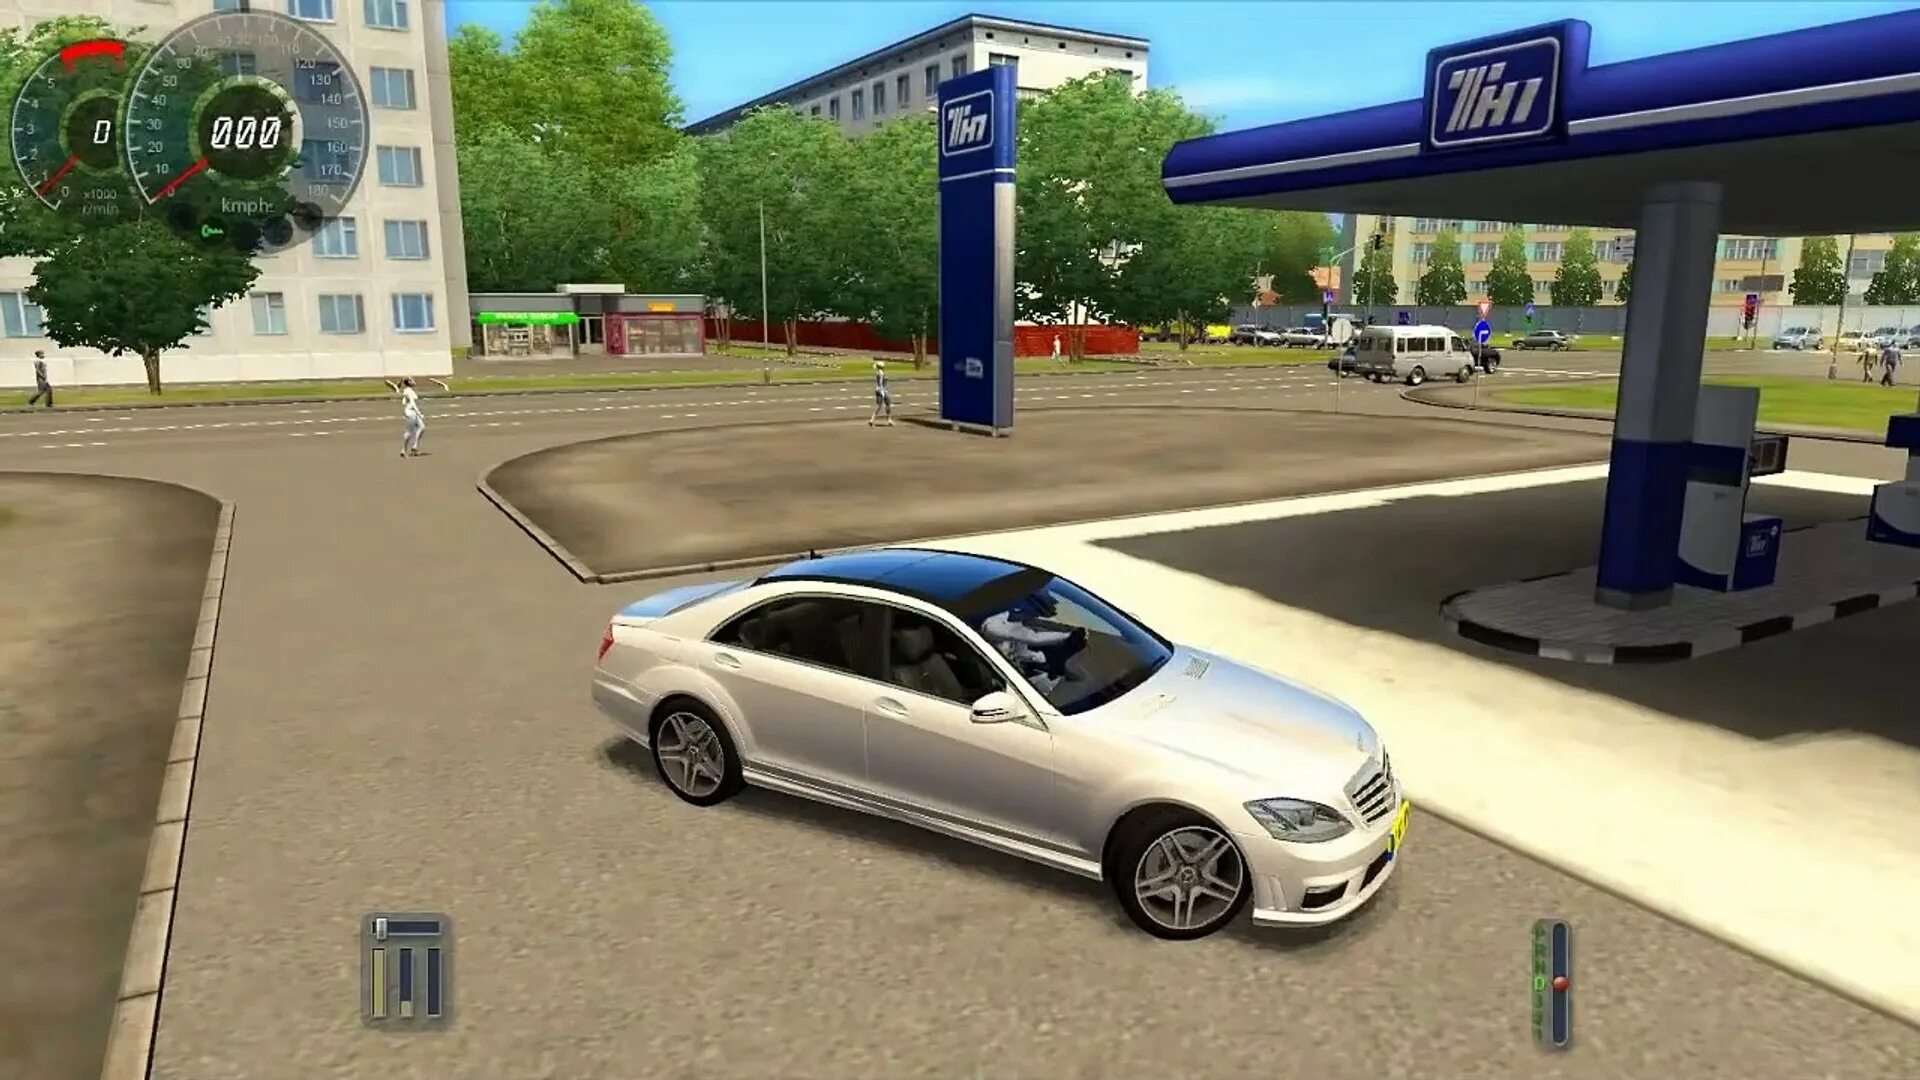 City car Driving Mercedes. City car Driving 2007 г.. Диск Сити кар драйвинг. City car Driving 1.3.1. City car games